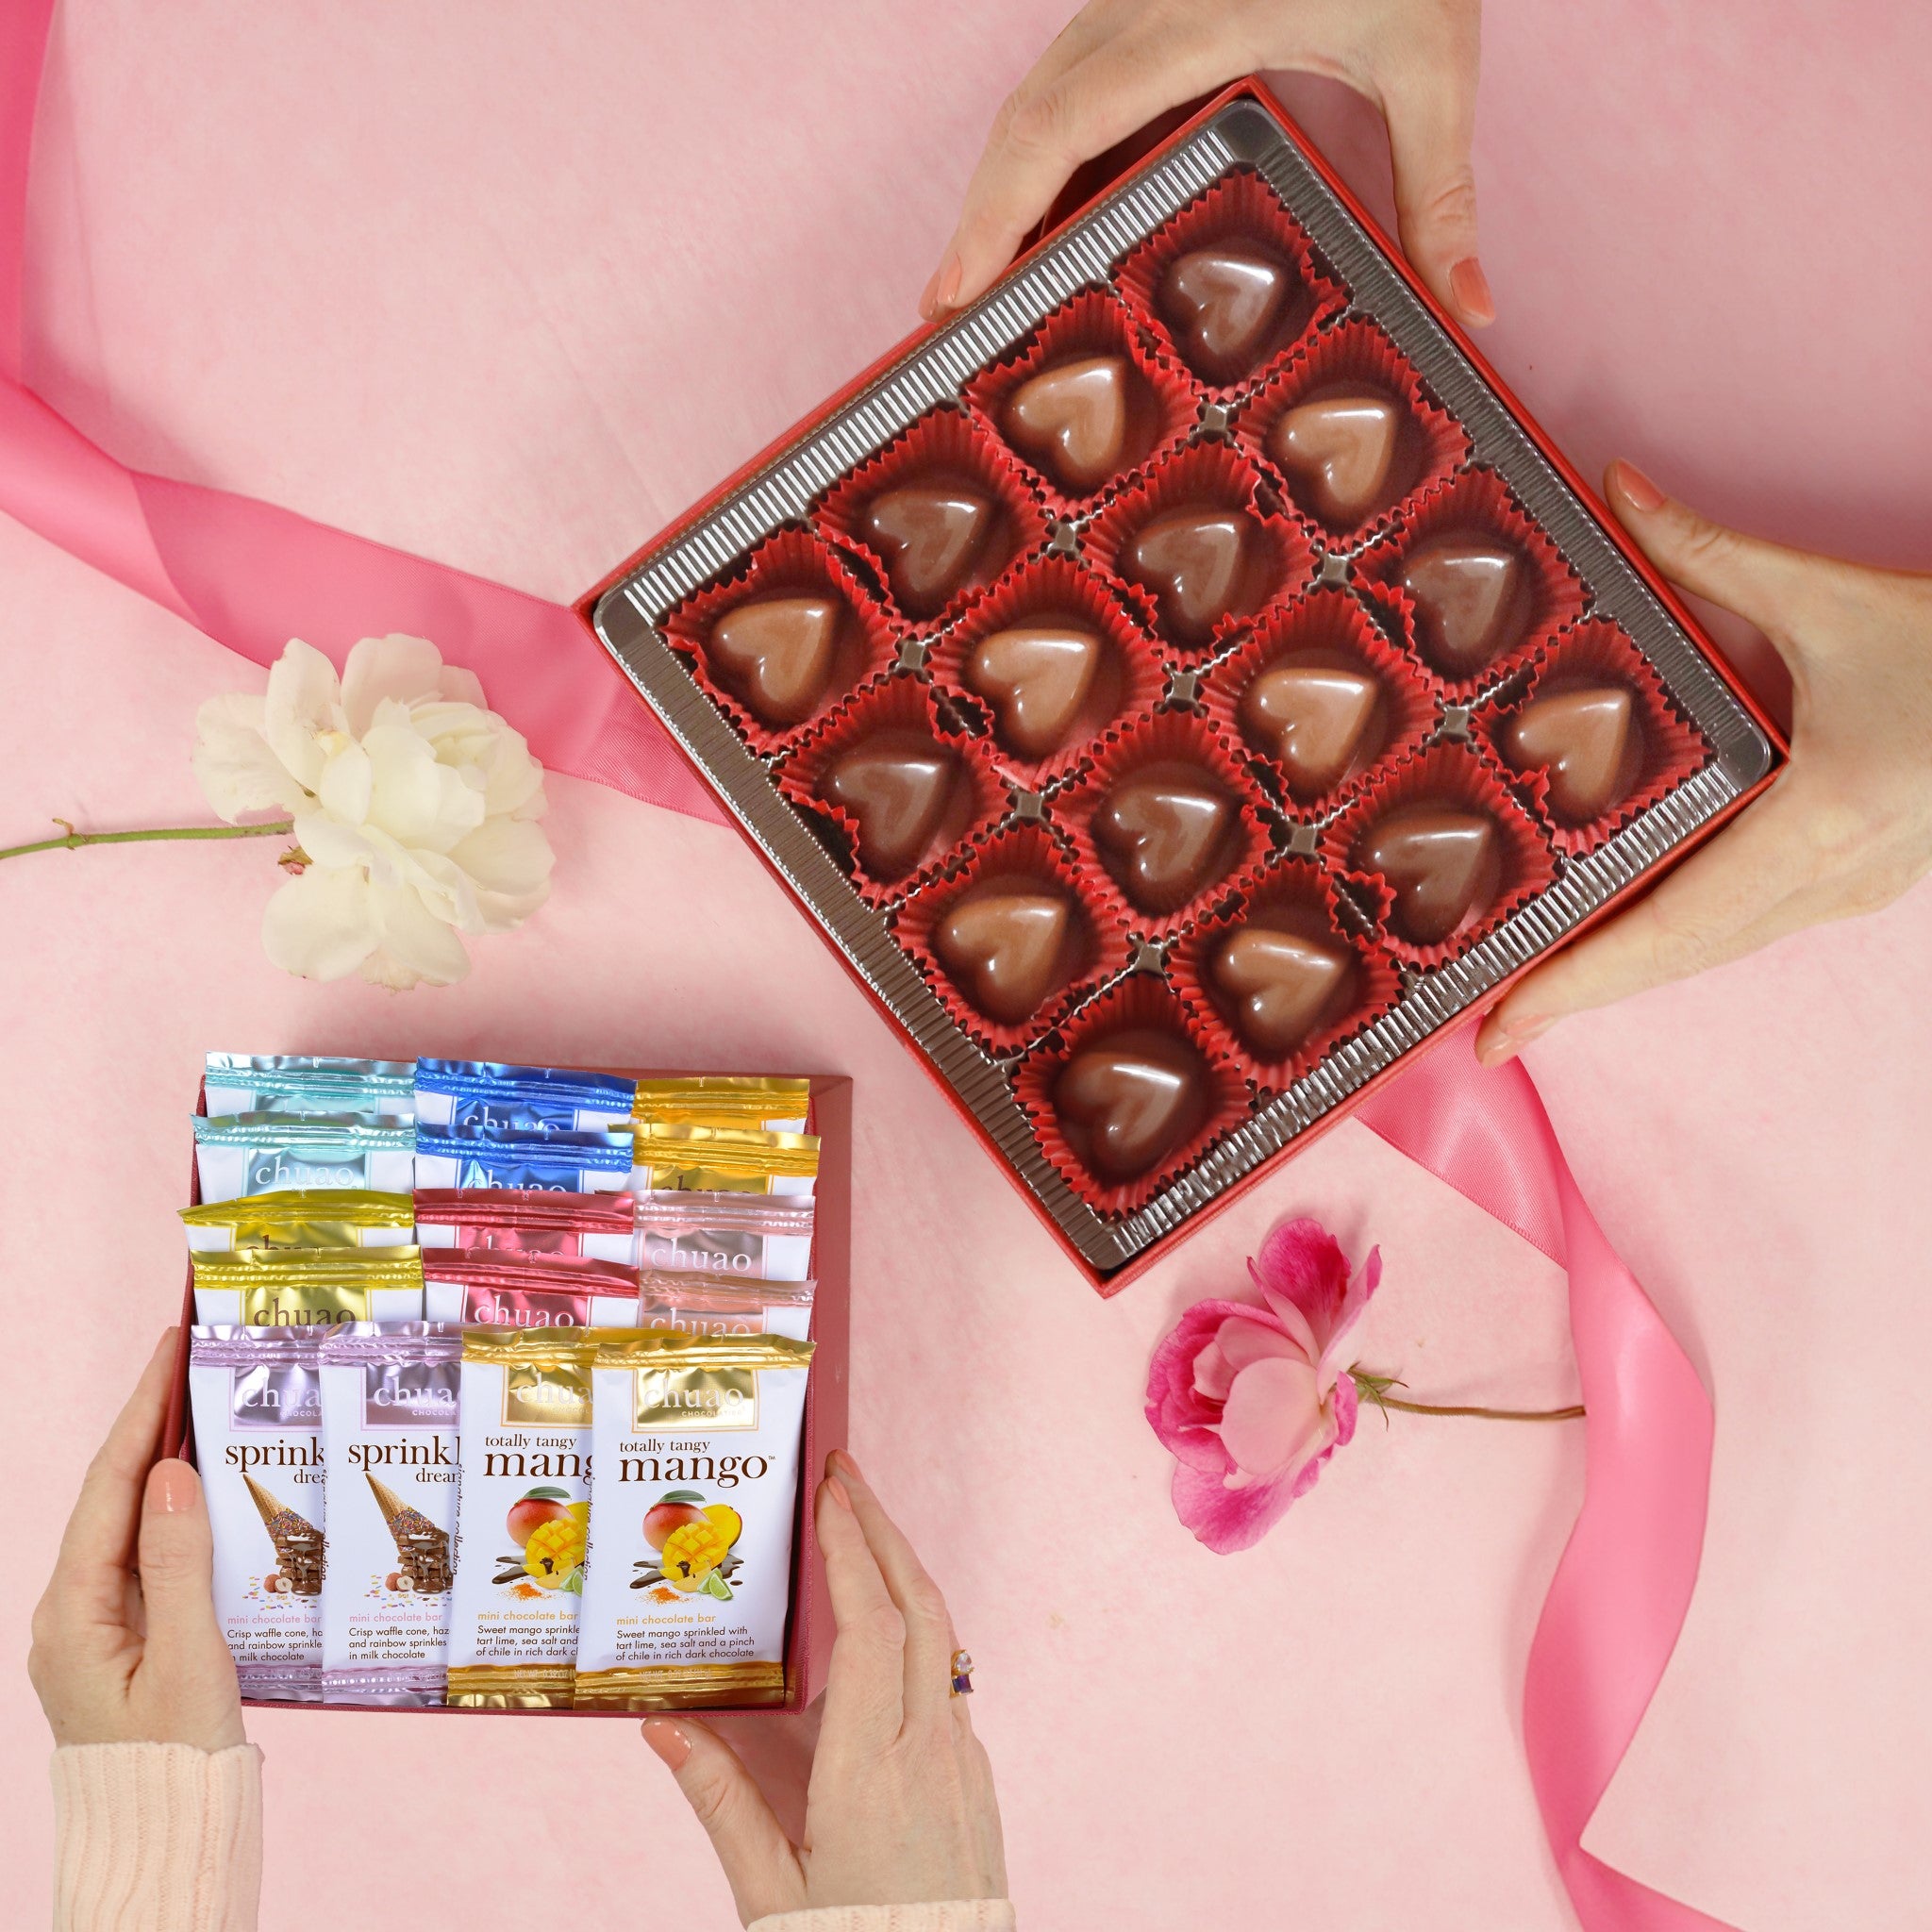 16 piece passionate hearts bonbons in a red tray over a pink background and ribbon with a 16 piece mini bar set